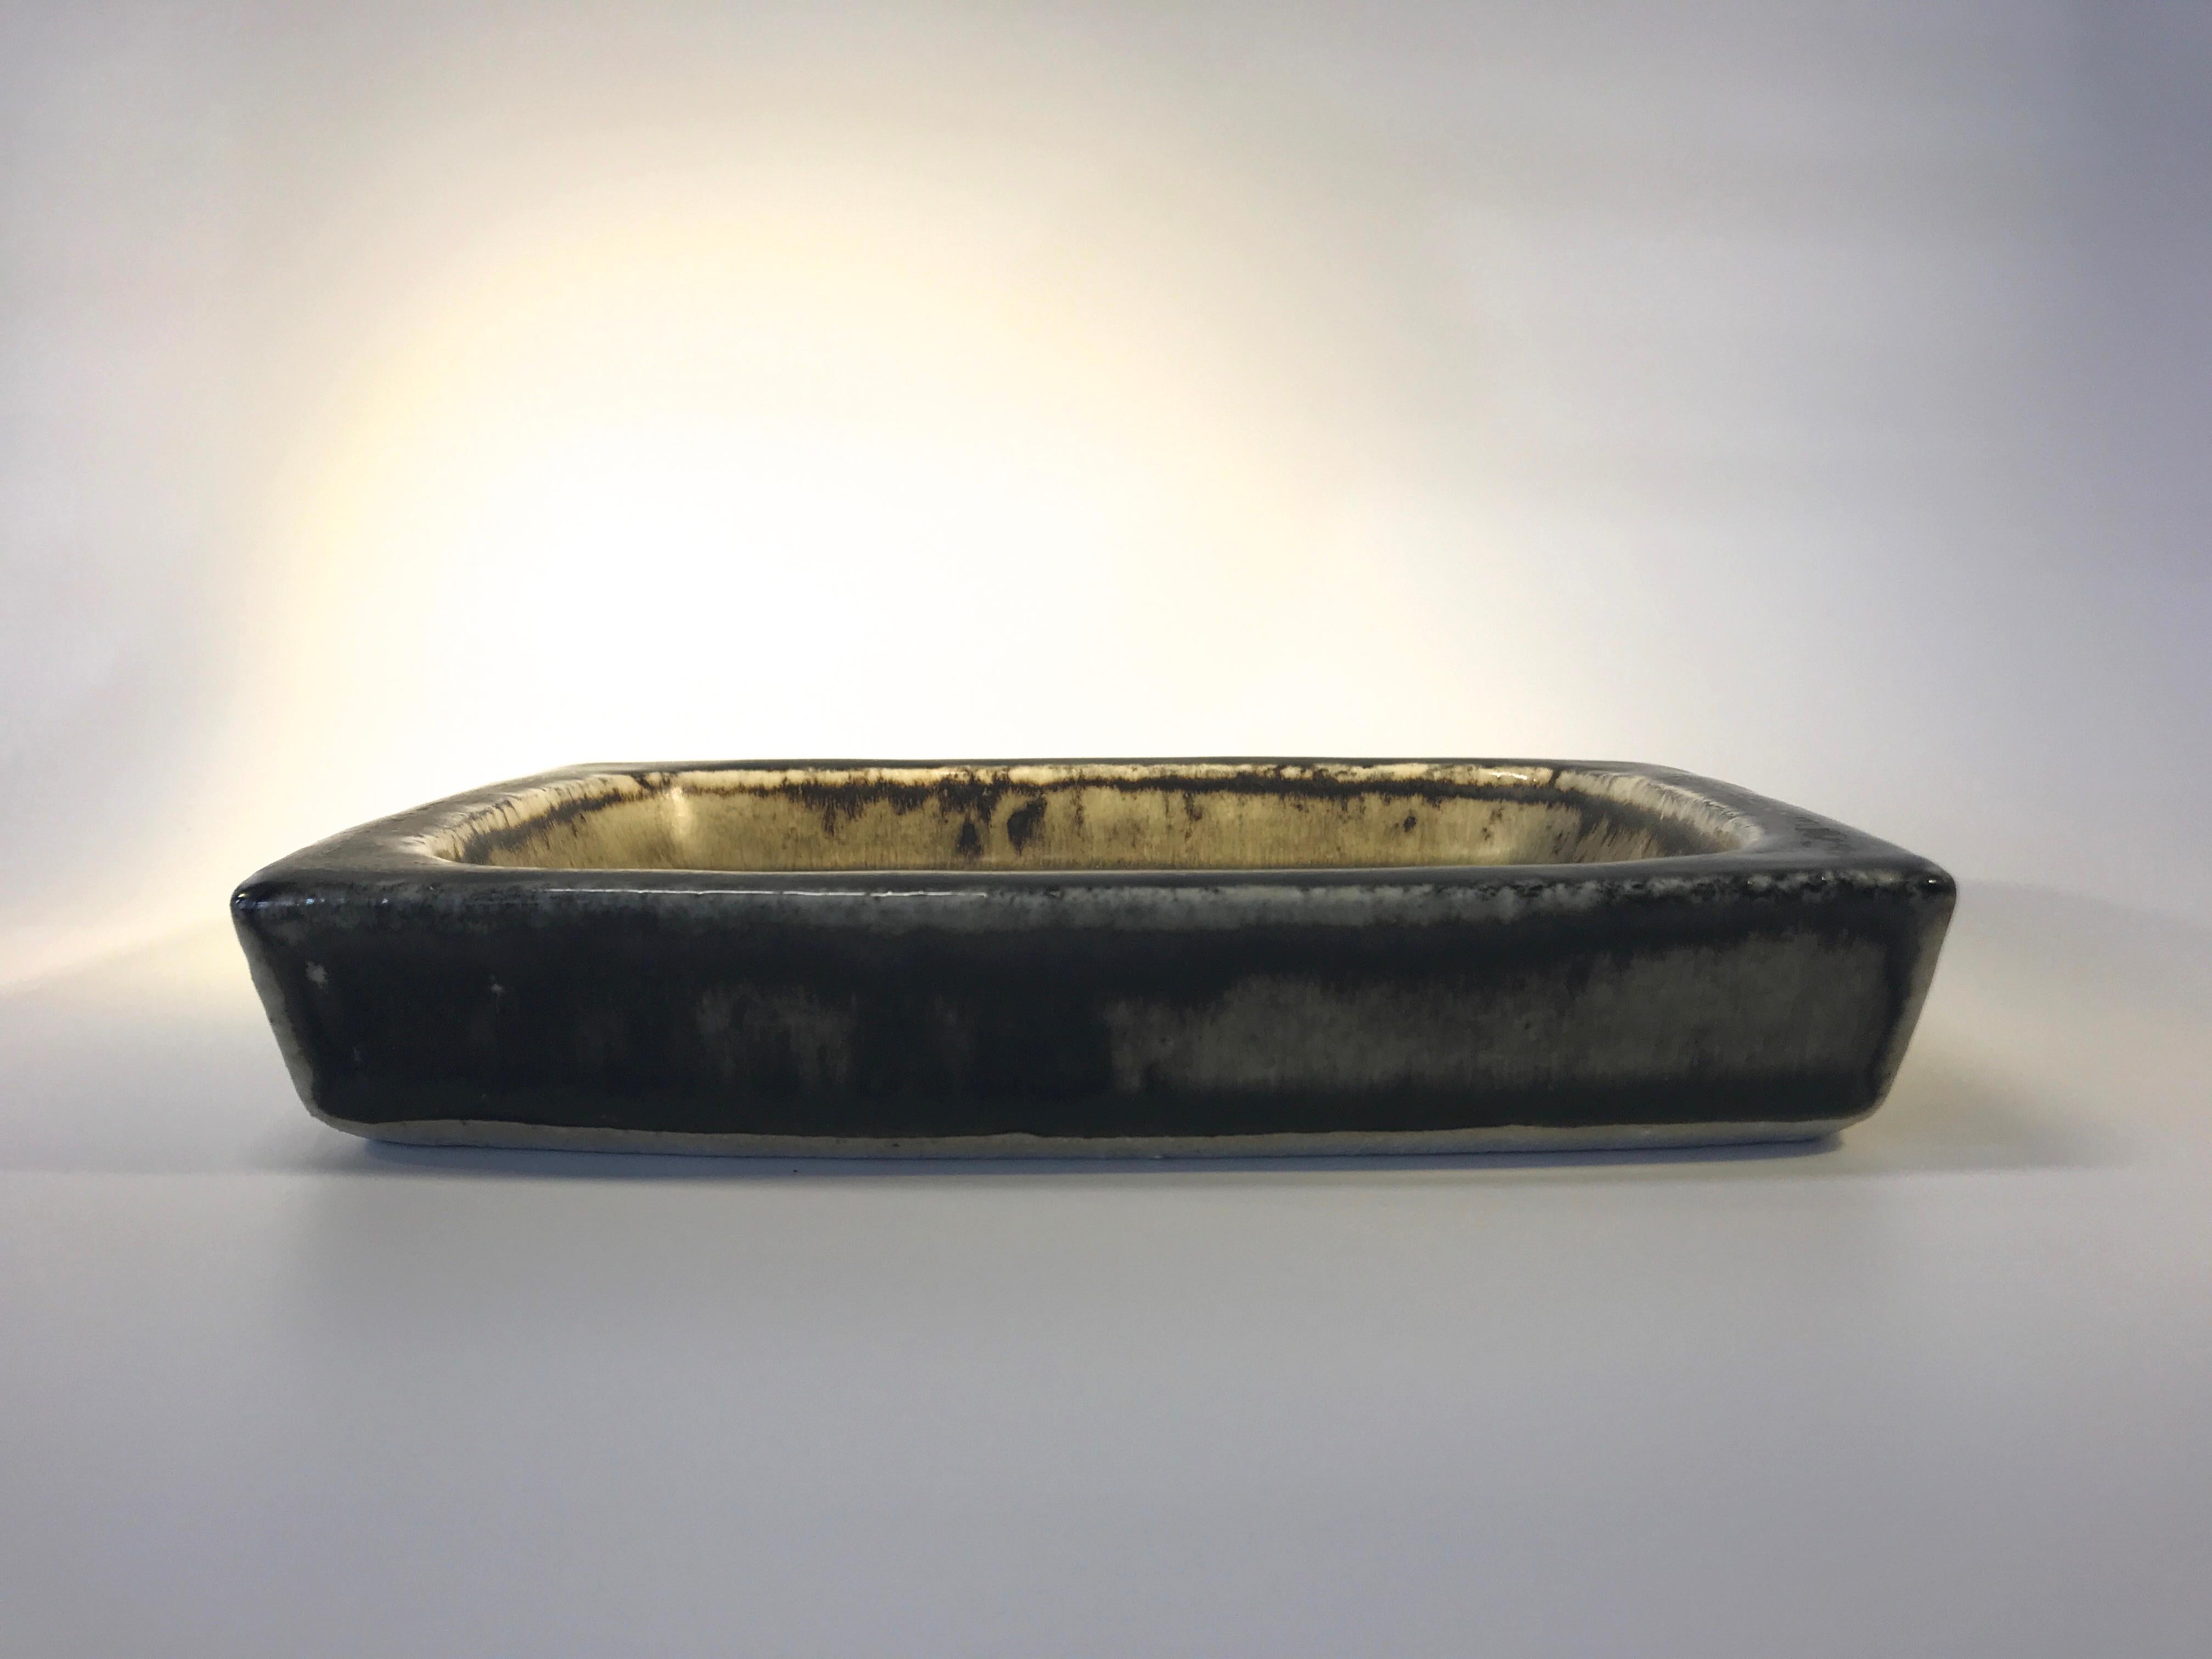 Oblong stoneware Scarab dish by Jorgen Mogensen for Royal Copenhagen, 1969.
The darkest of brown glazes with a dark blue and sand intriguing design of scarab beetles
Length 8.25 inch, Width 6 inch, Depth 1.5 inch
Excellent condition and glaze
Wear